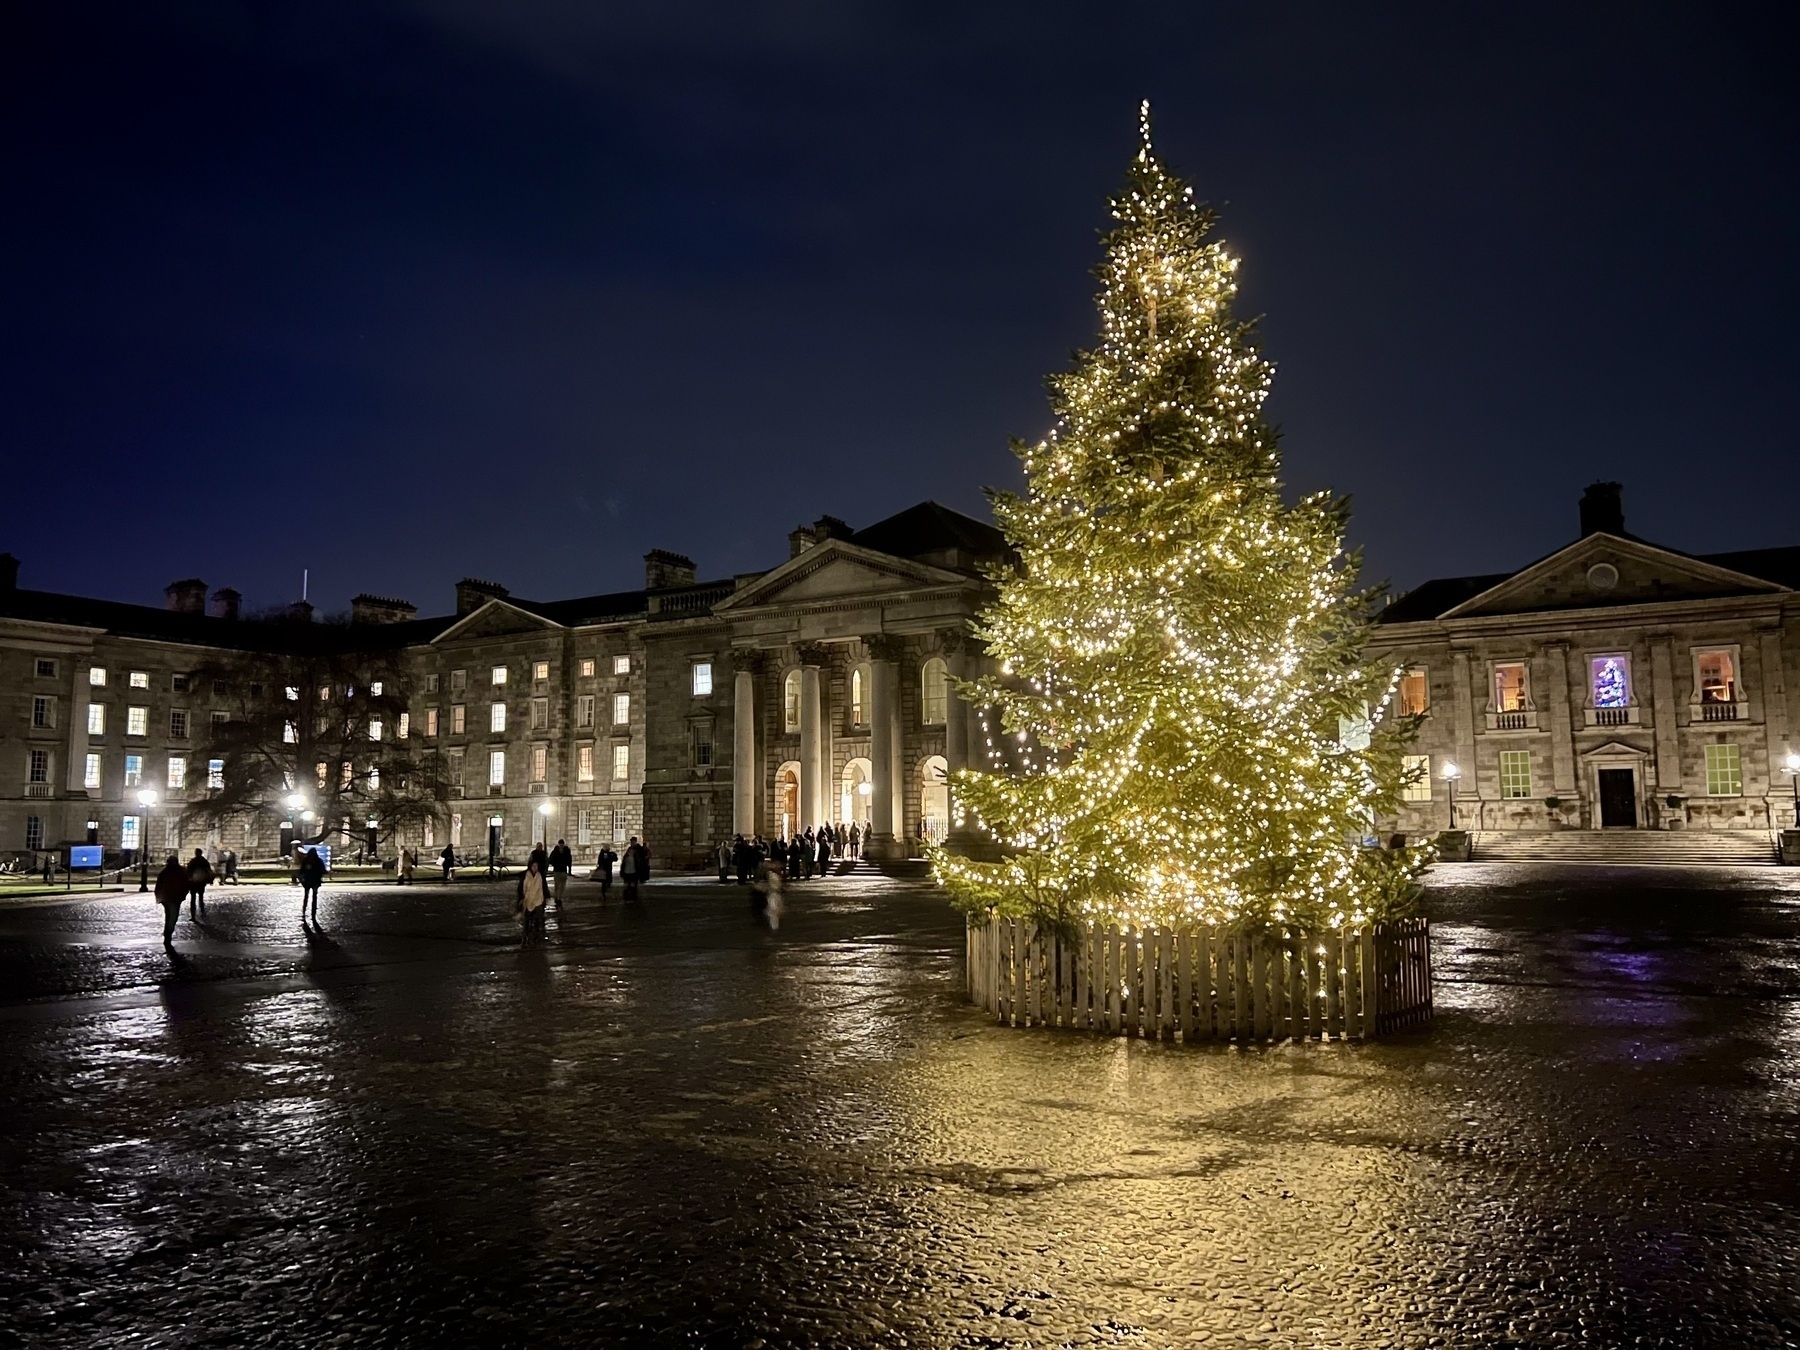 Christmas Tree in the main square Trinity College Dublin. 